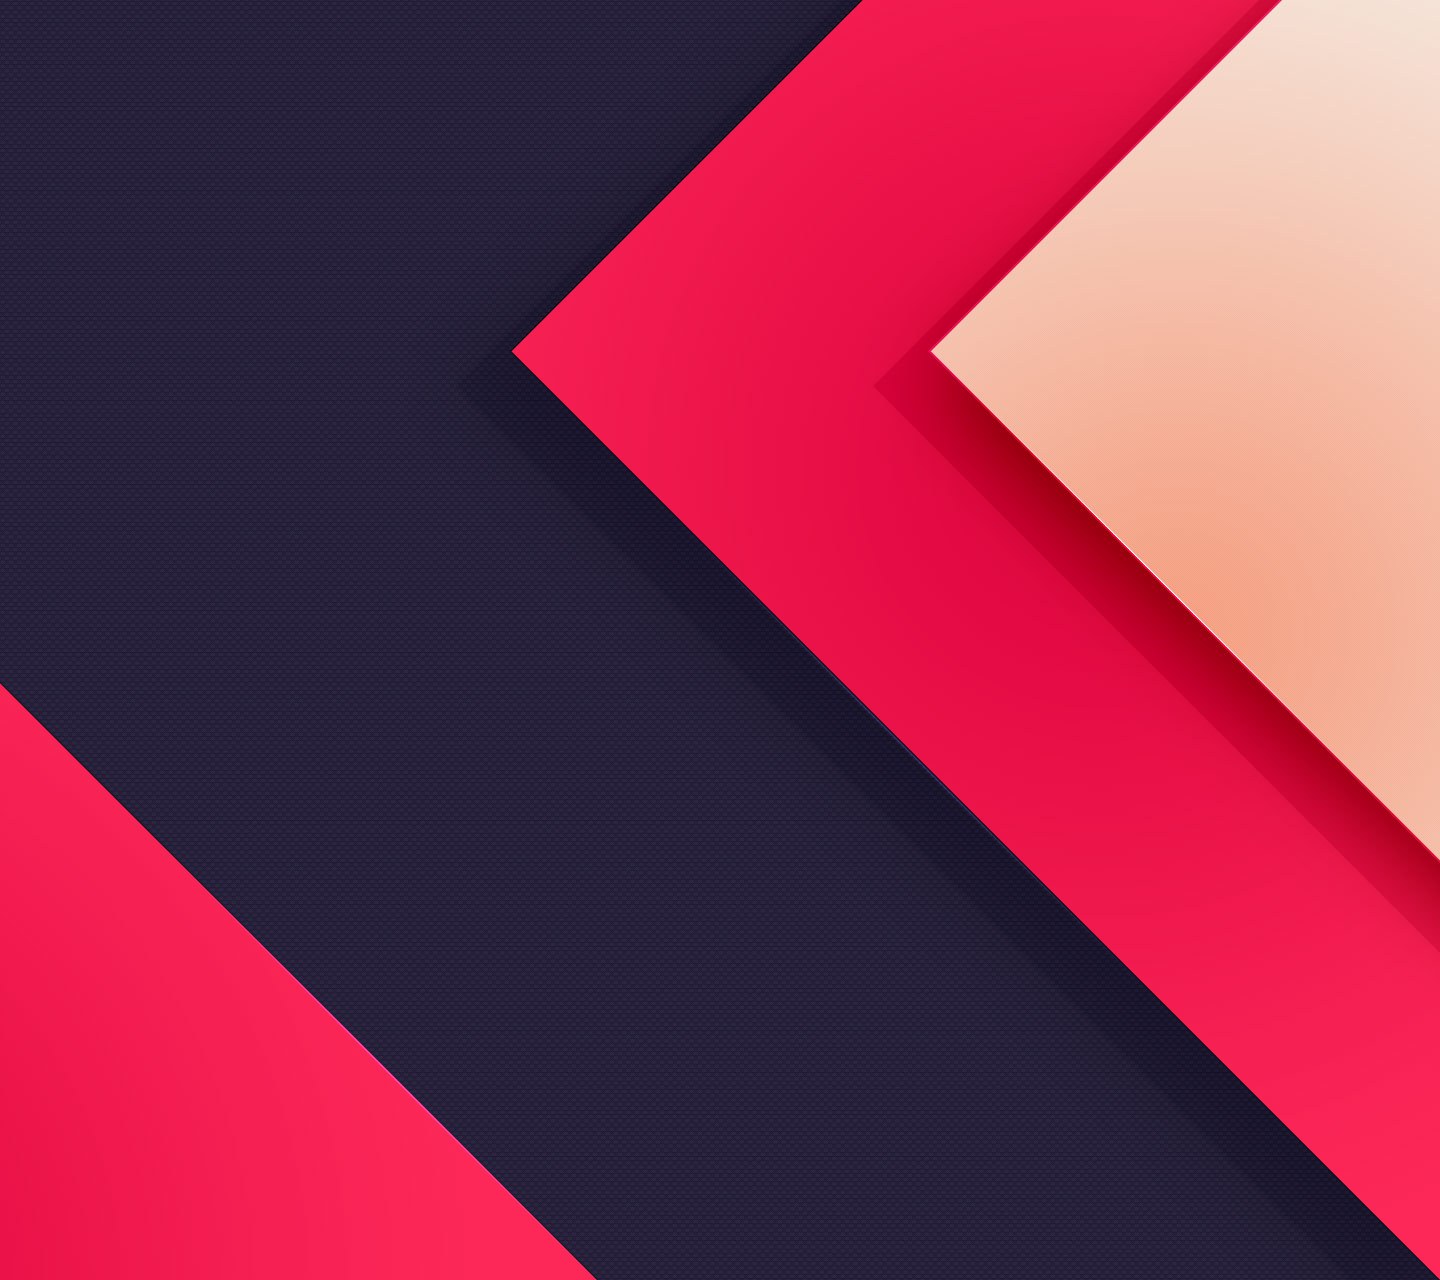 Awesome Wallpaper Inspired By Google S Material Design